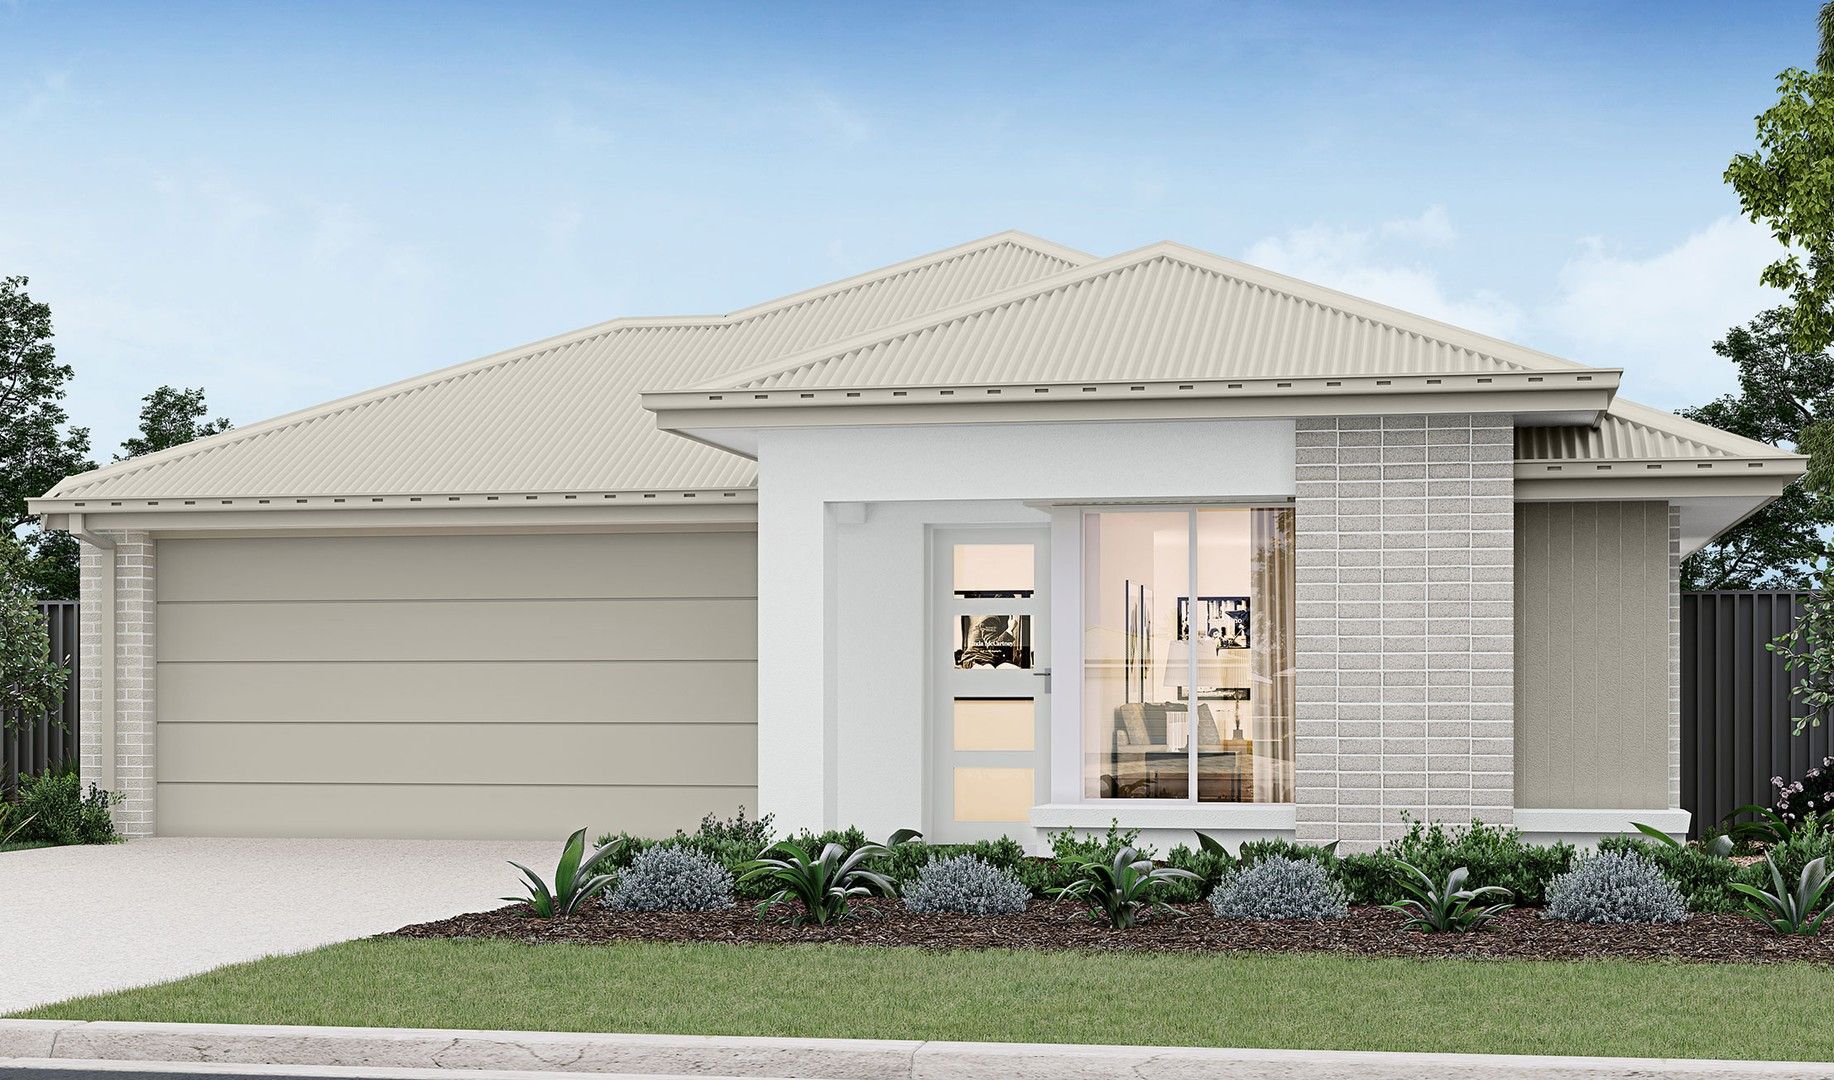 4 bedrooms New House & Land in 135 Belhaven Ave YARRABILBA QLD, 4207